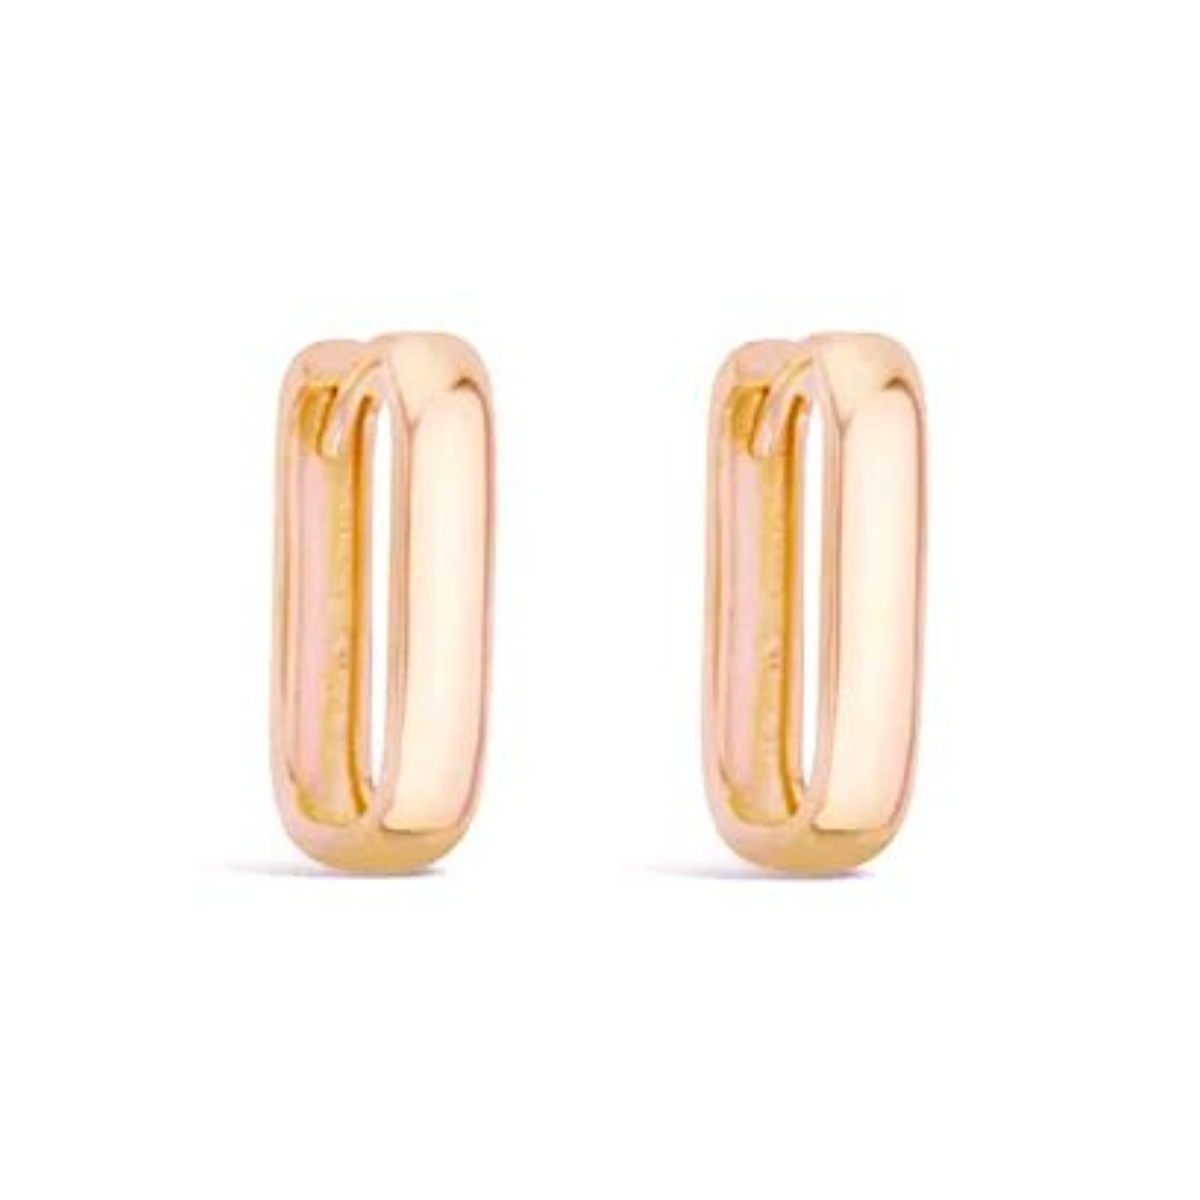 9 Carat Gold Paperclip Rounded Rectangle Huggie Earrings (12mm x 7mm)